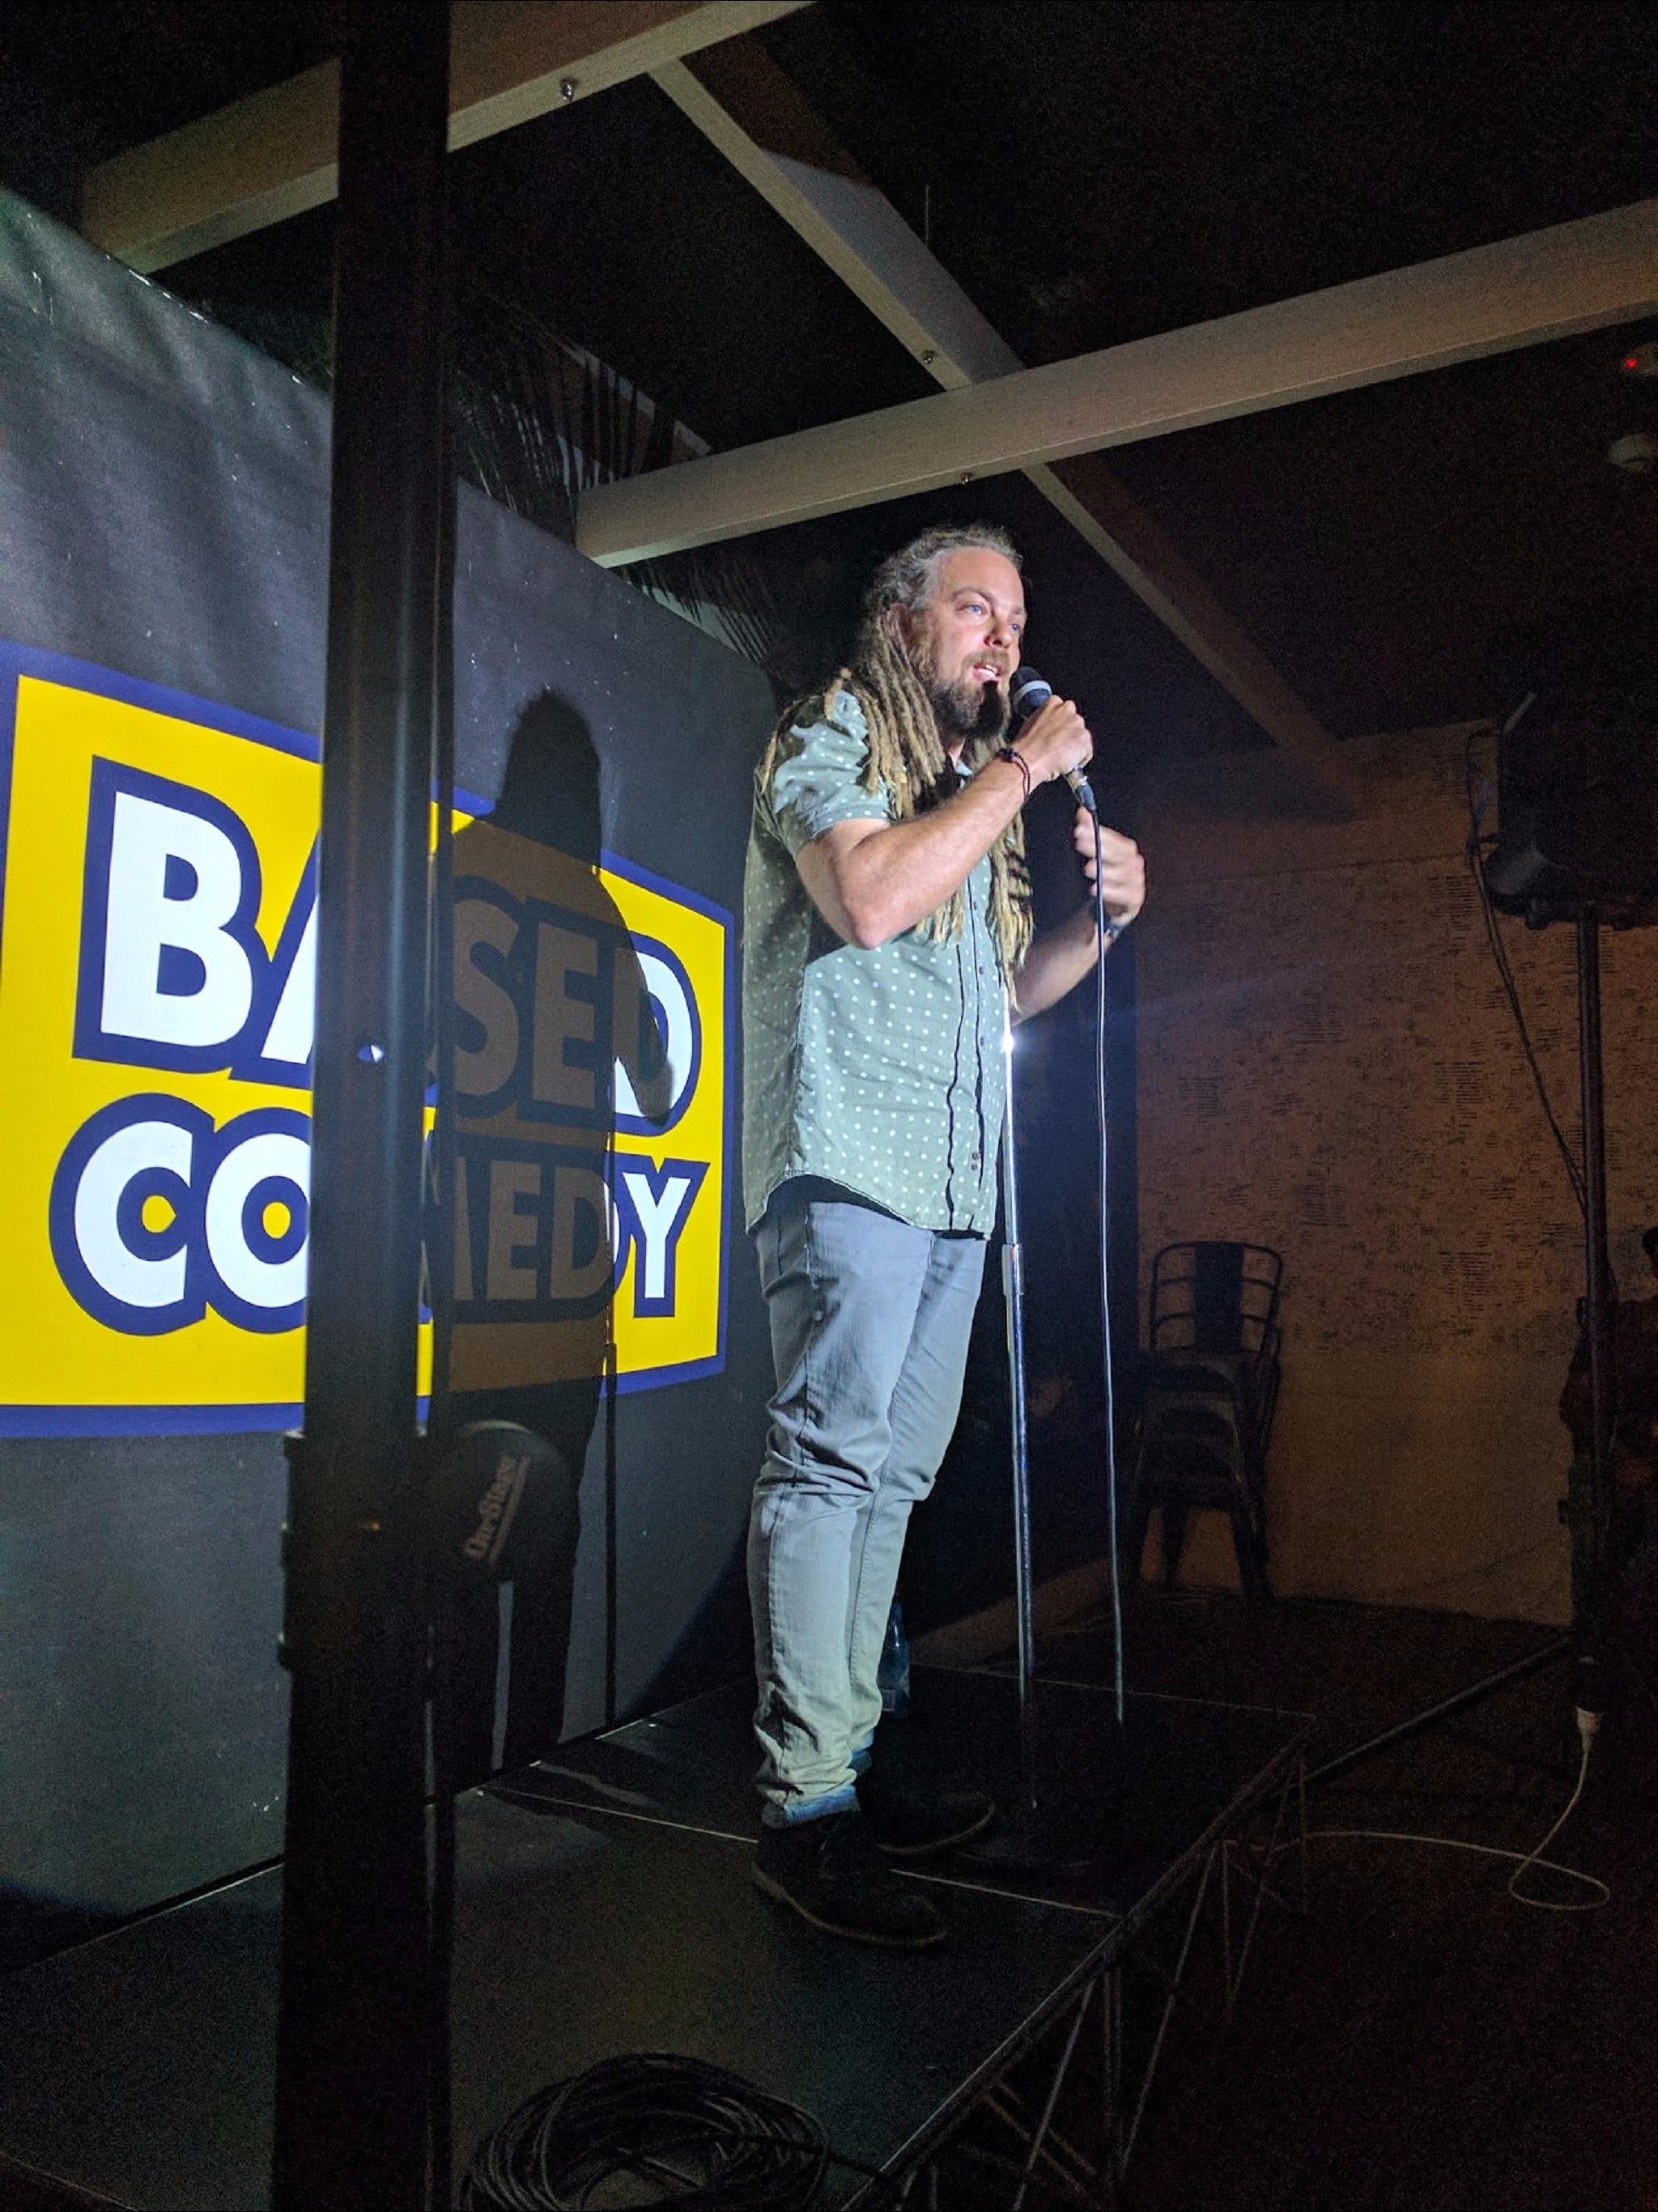 Based Comedy at The Palm Beach Hotel - Accommodation Airlie Beach